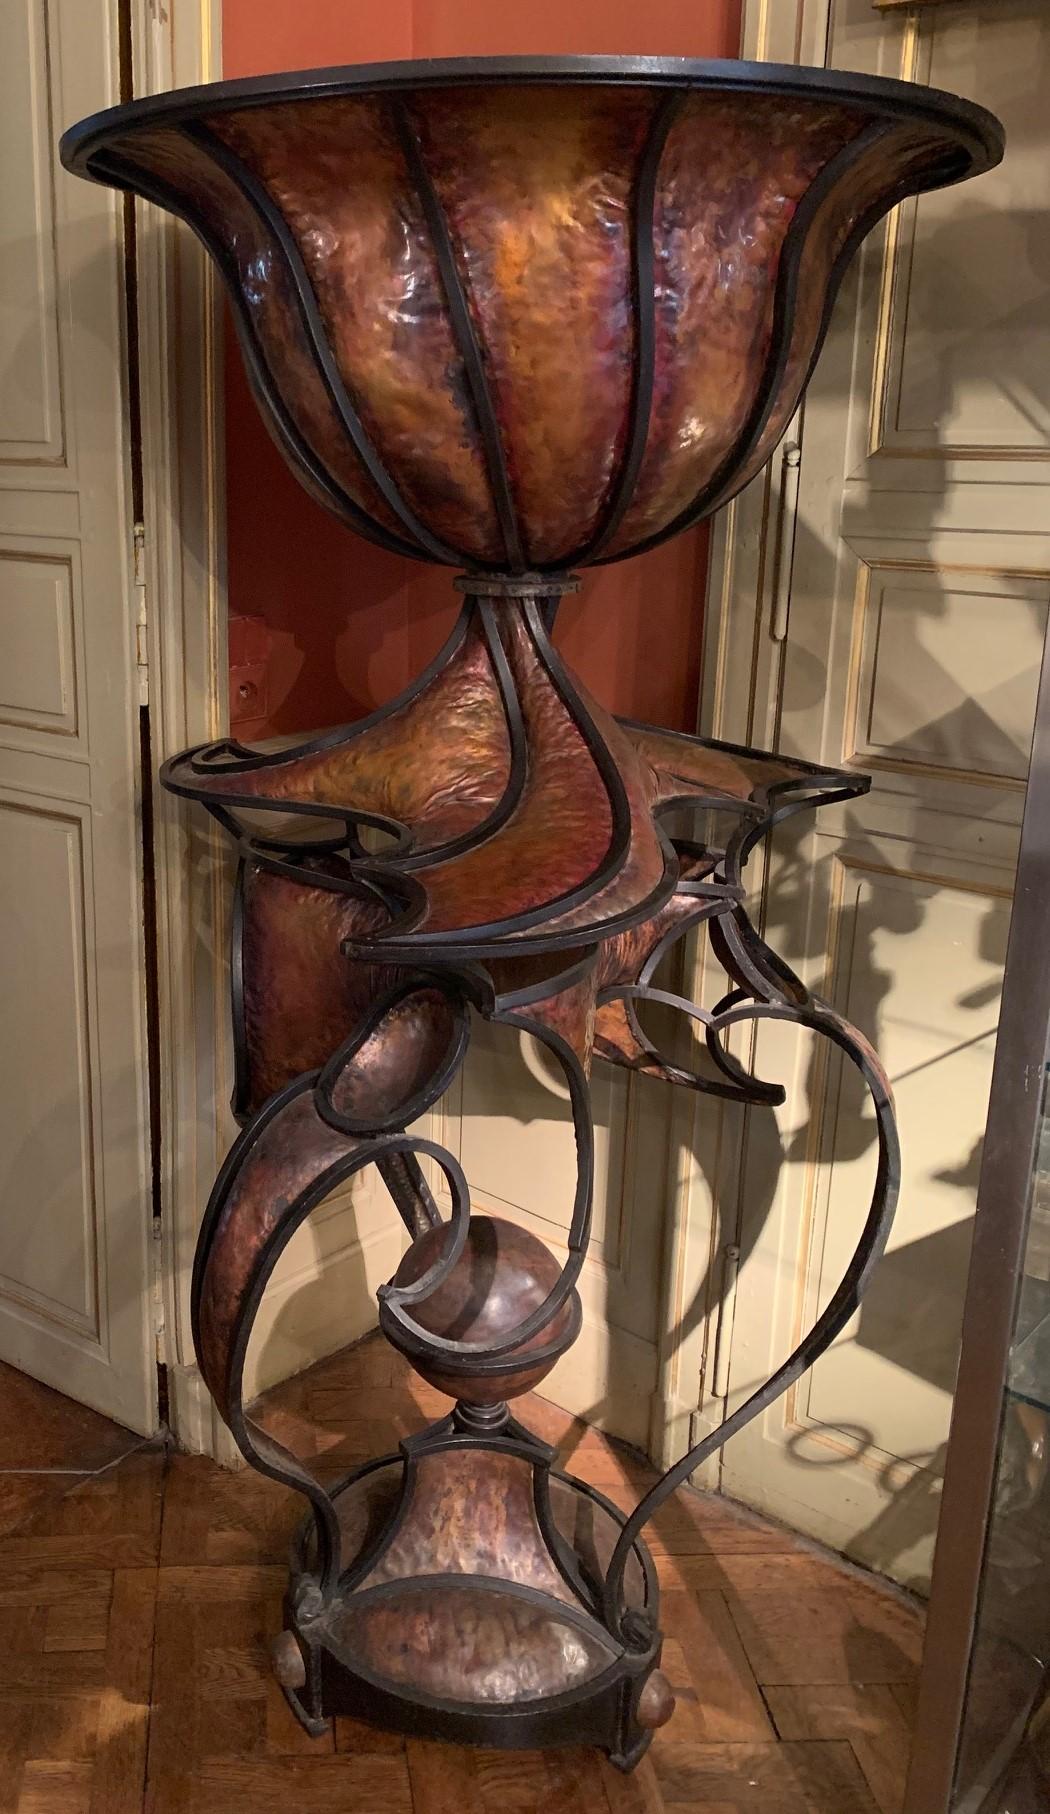 Planter in copper and wrought iron, a large flared cup on the top, all resting on a circular tripod base.
André Dubreuil was born in Lyon in 1951 and died in April 2022.
He was one of the most singular creators of his time. The one that cannot be